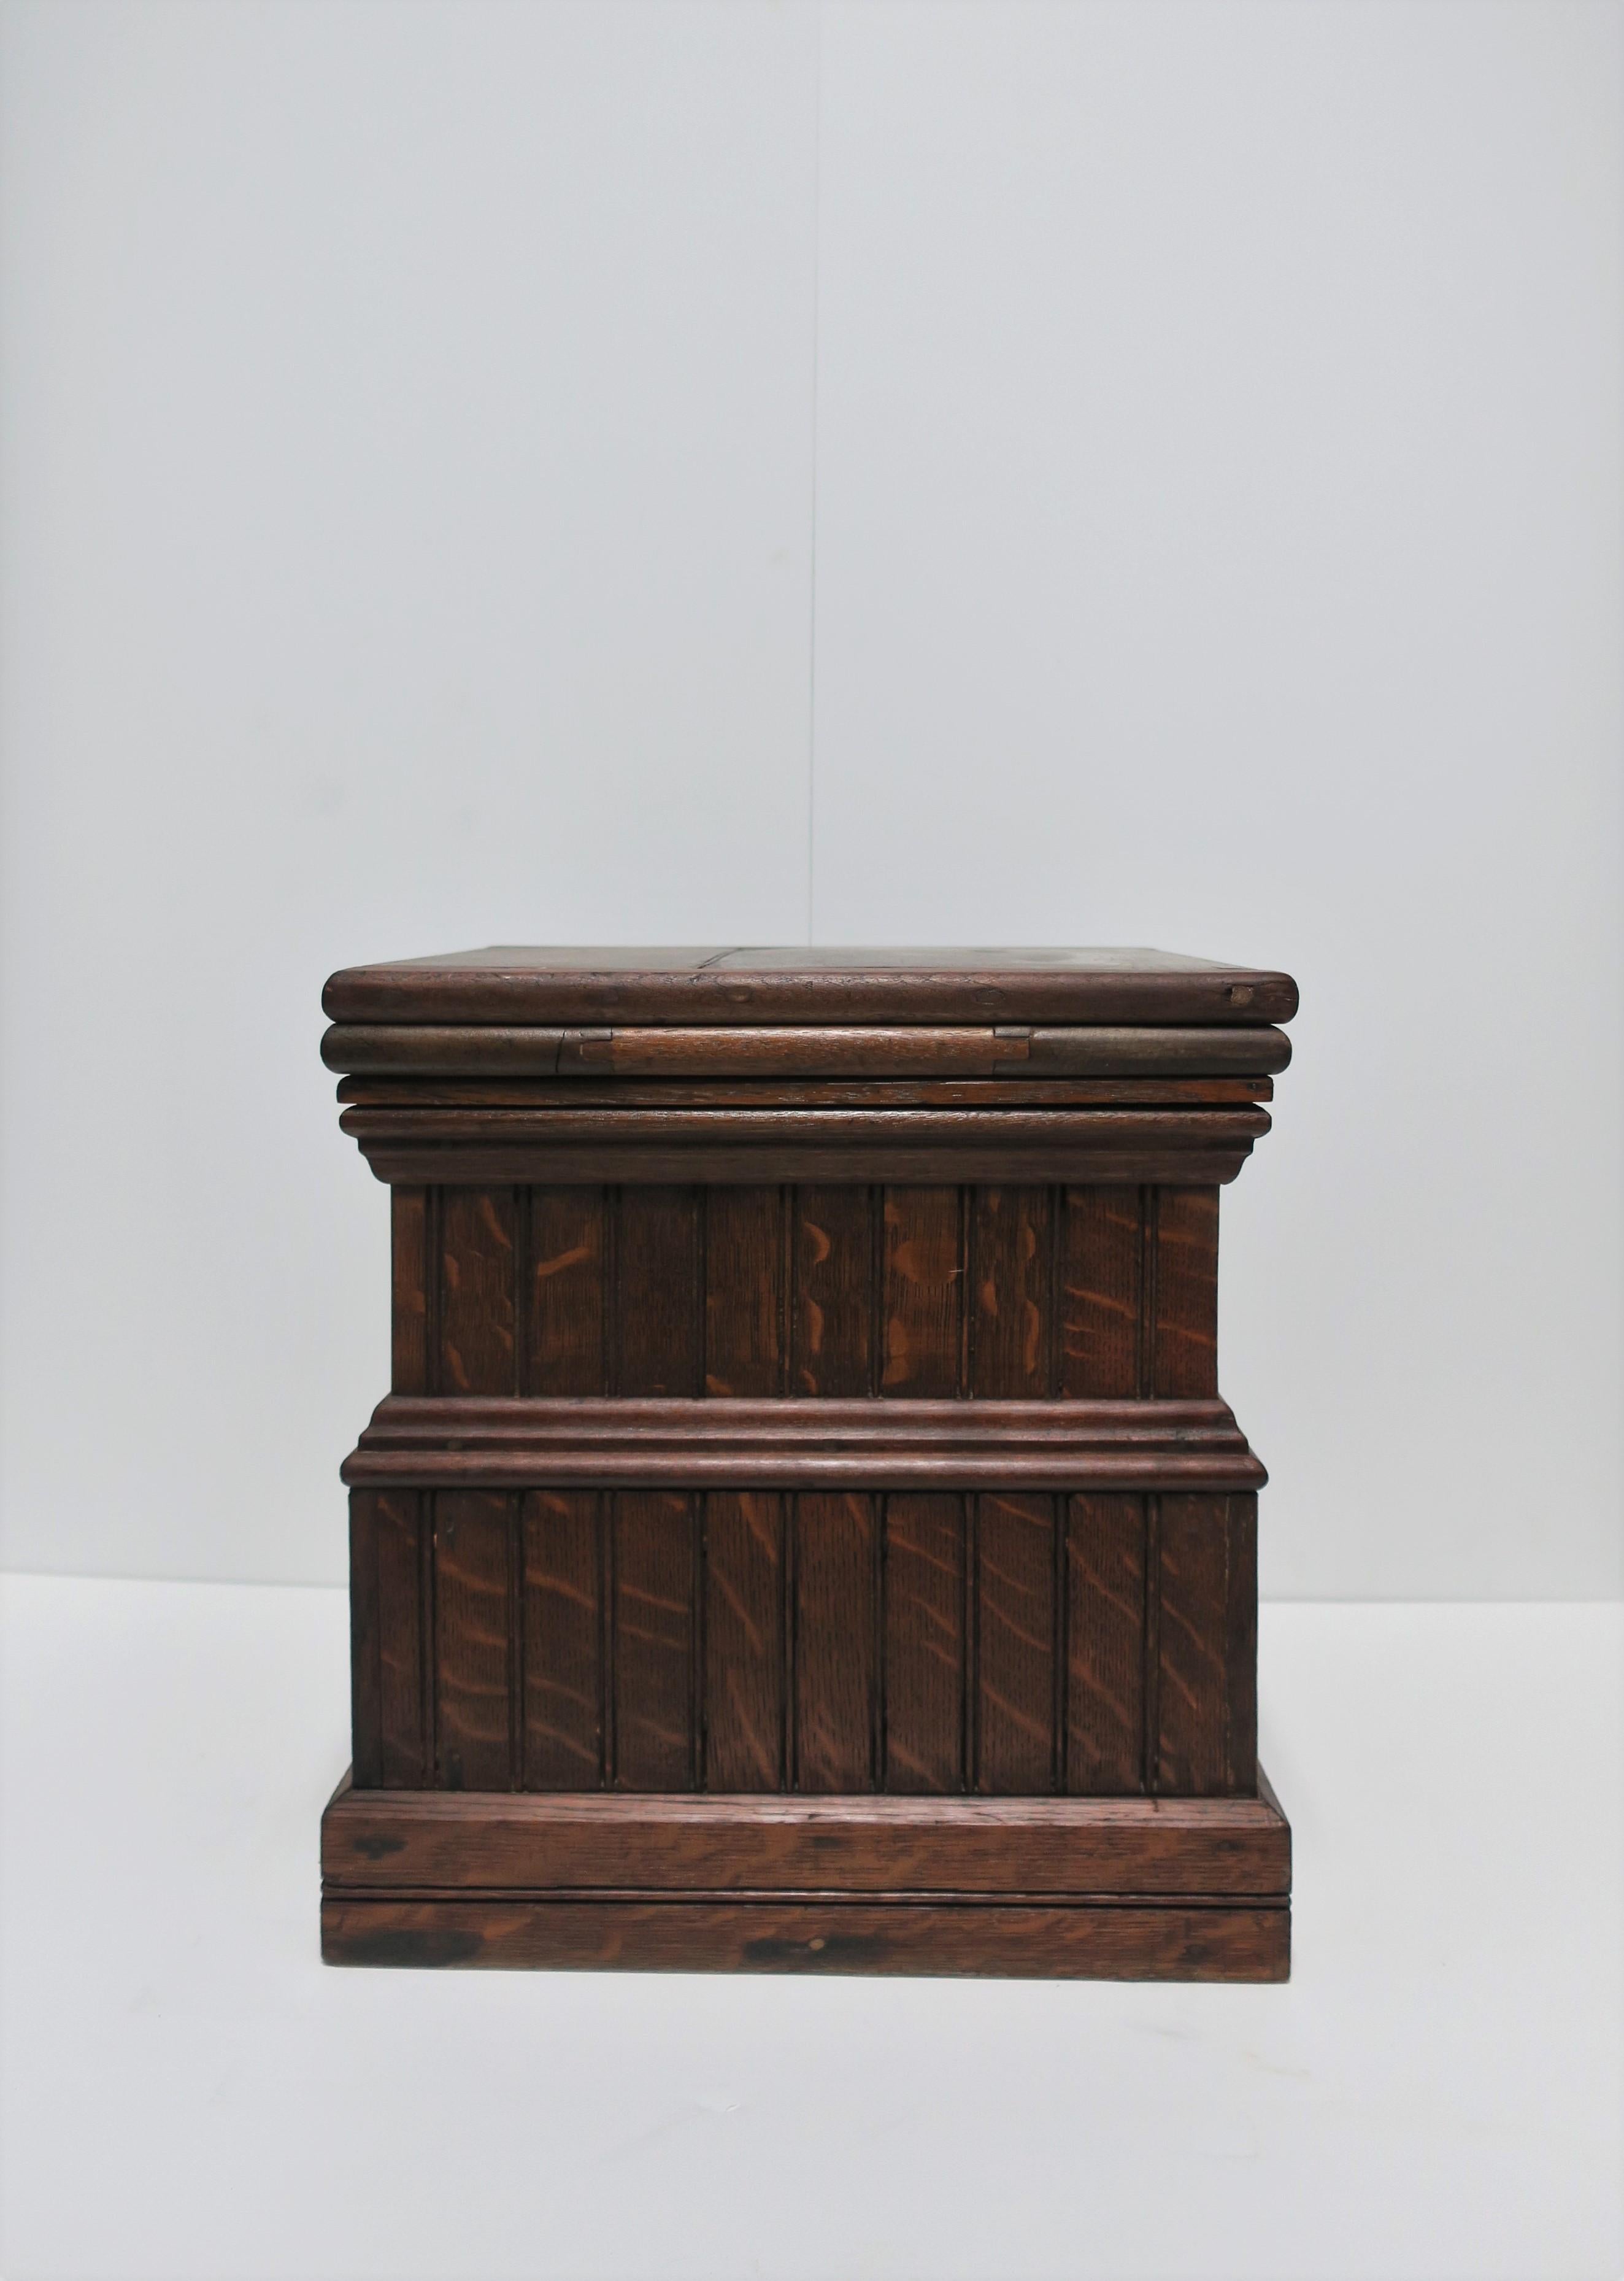 A beautiful and well made European antique column architecture square wood pedestal for sculpture or plant, etc., or as a pedestal end or side table, circa 19th century, Europe. 

Measures: 13.63